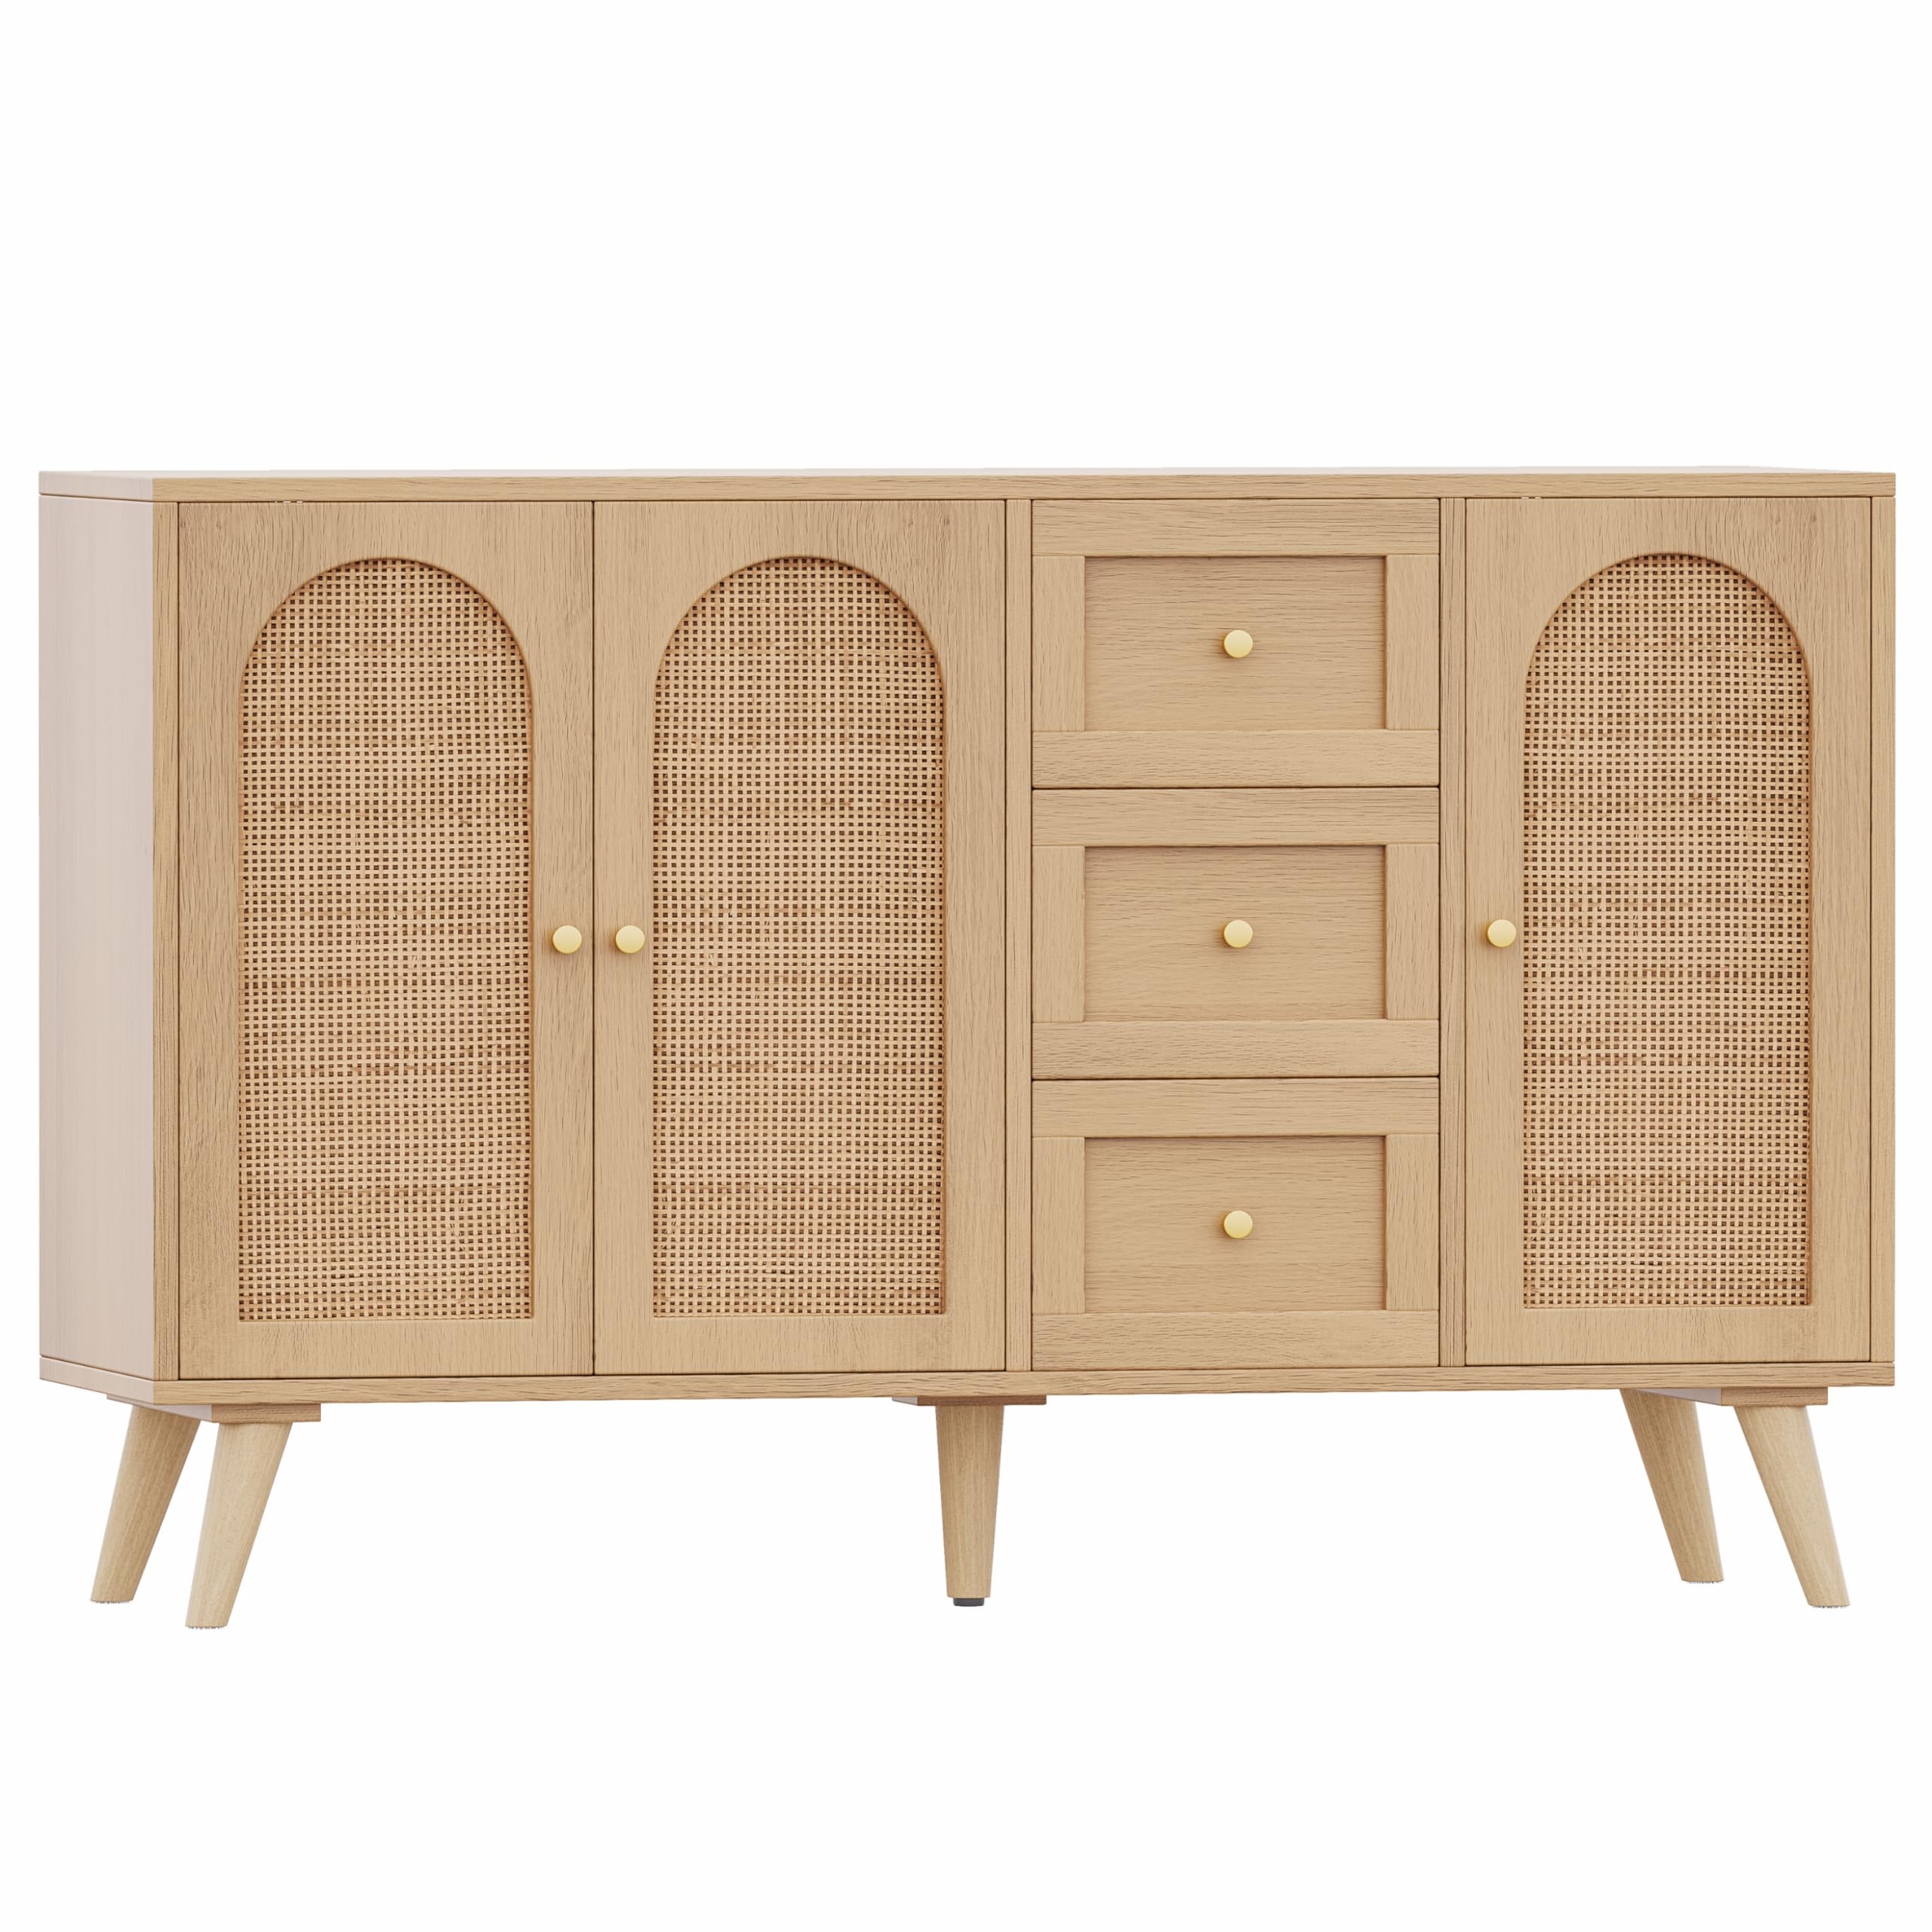 Keehusux Rattan Sideboard, Buffet Cabinet with Rattan Decorated Doors and Adjustable Shelves, Console Table with Drawers, Accent Cabinet for Living Room, Dining Room,Hallway, Natural KES003MCWG